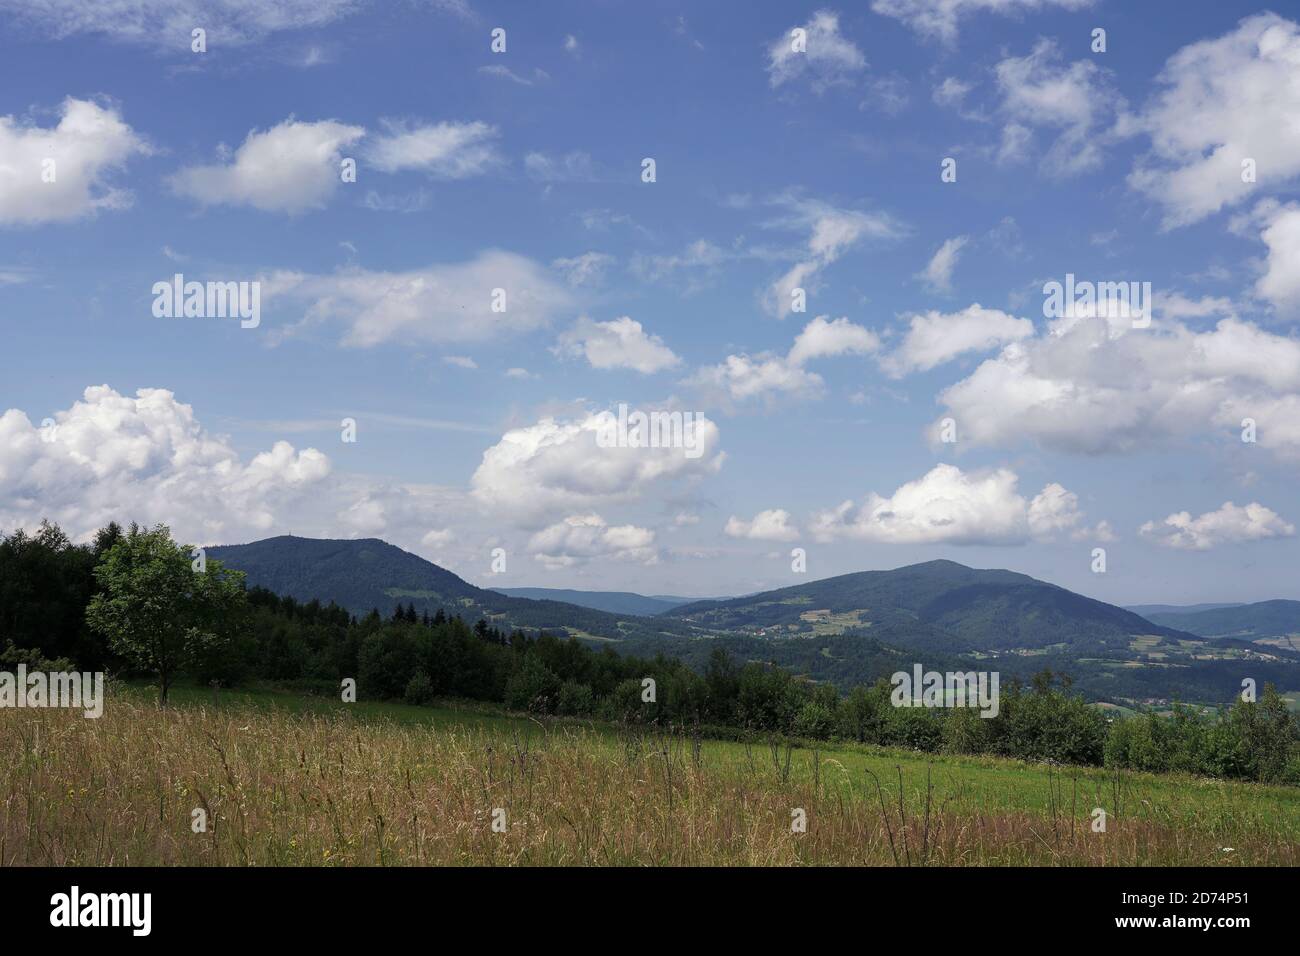 July in the Beskids, view from a mountain meadow on the forest, peaks and valleys, landscape Stock Photo